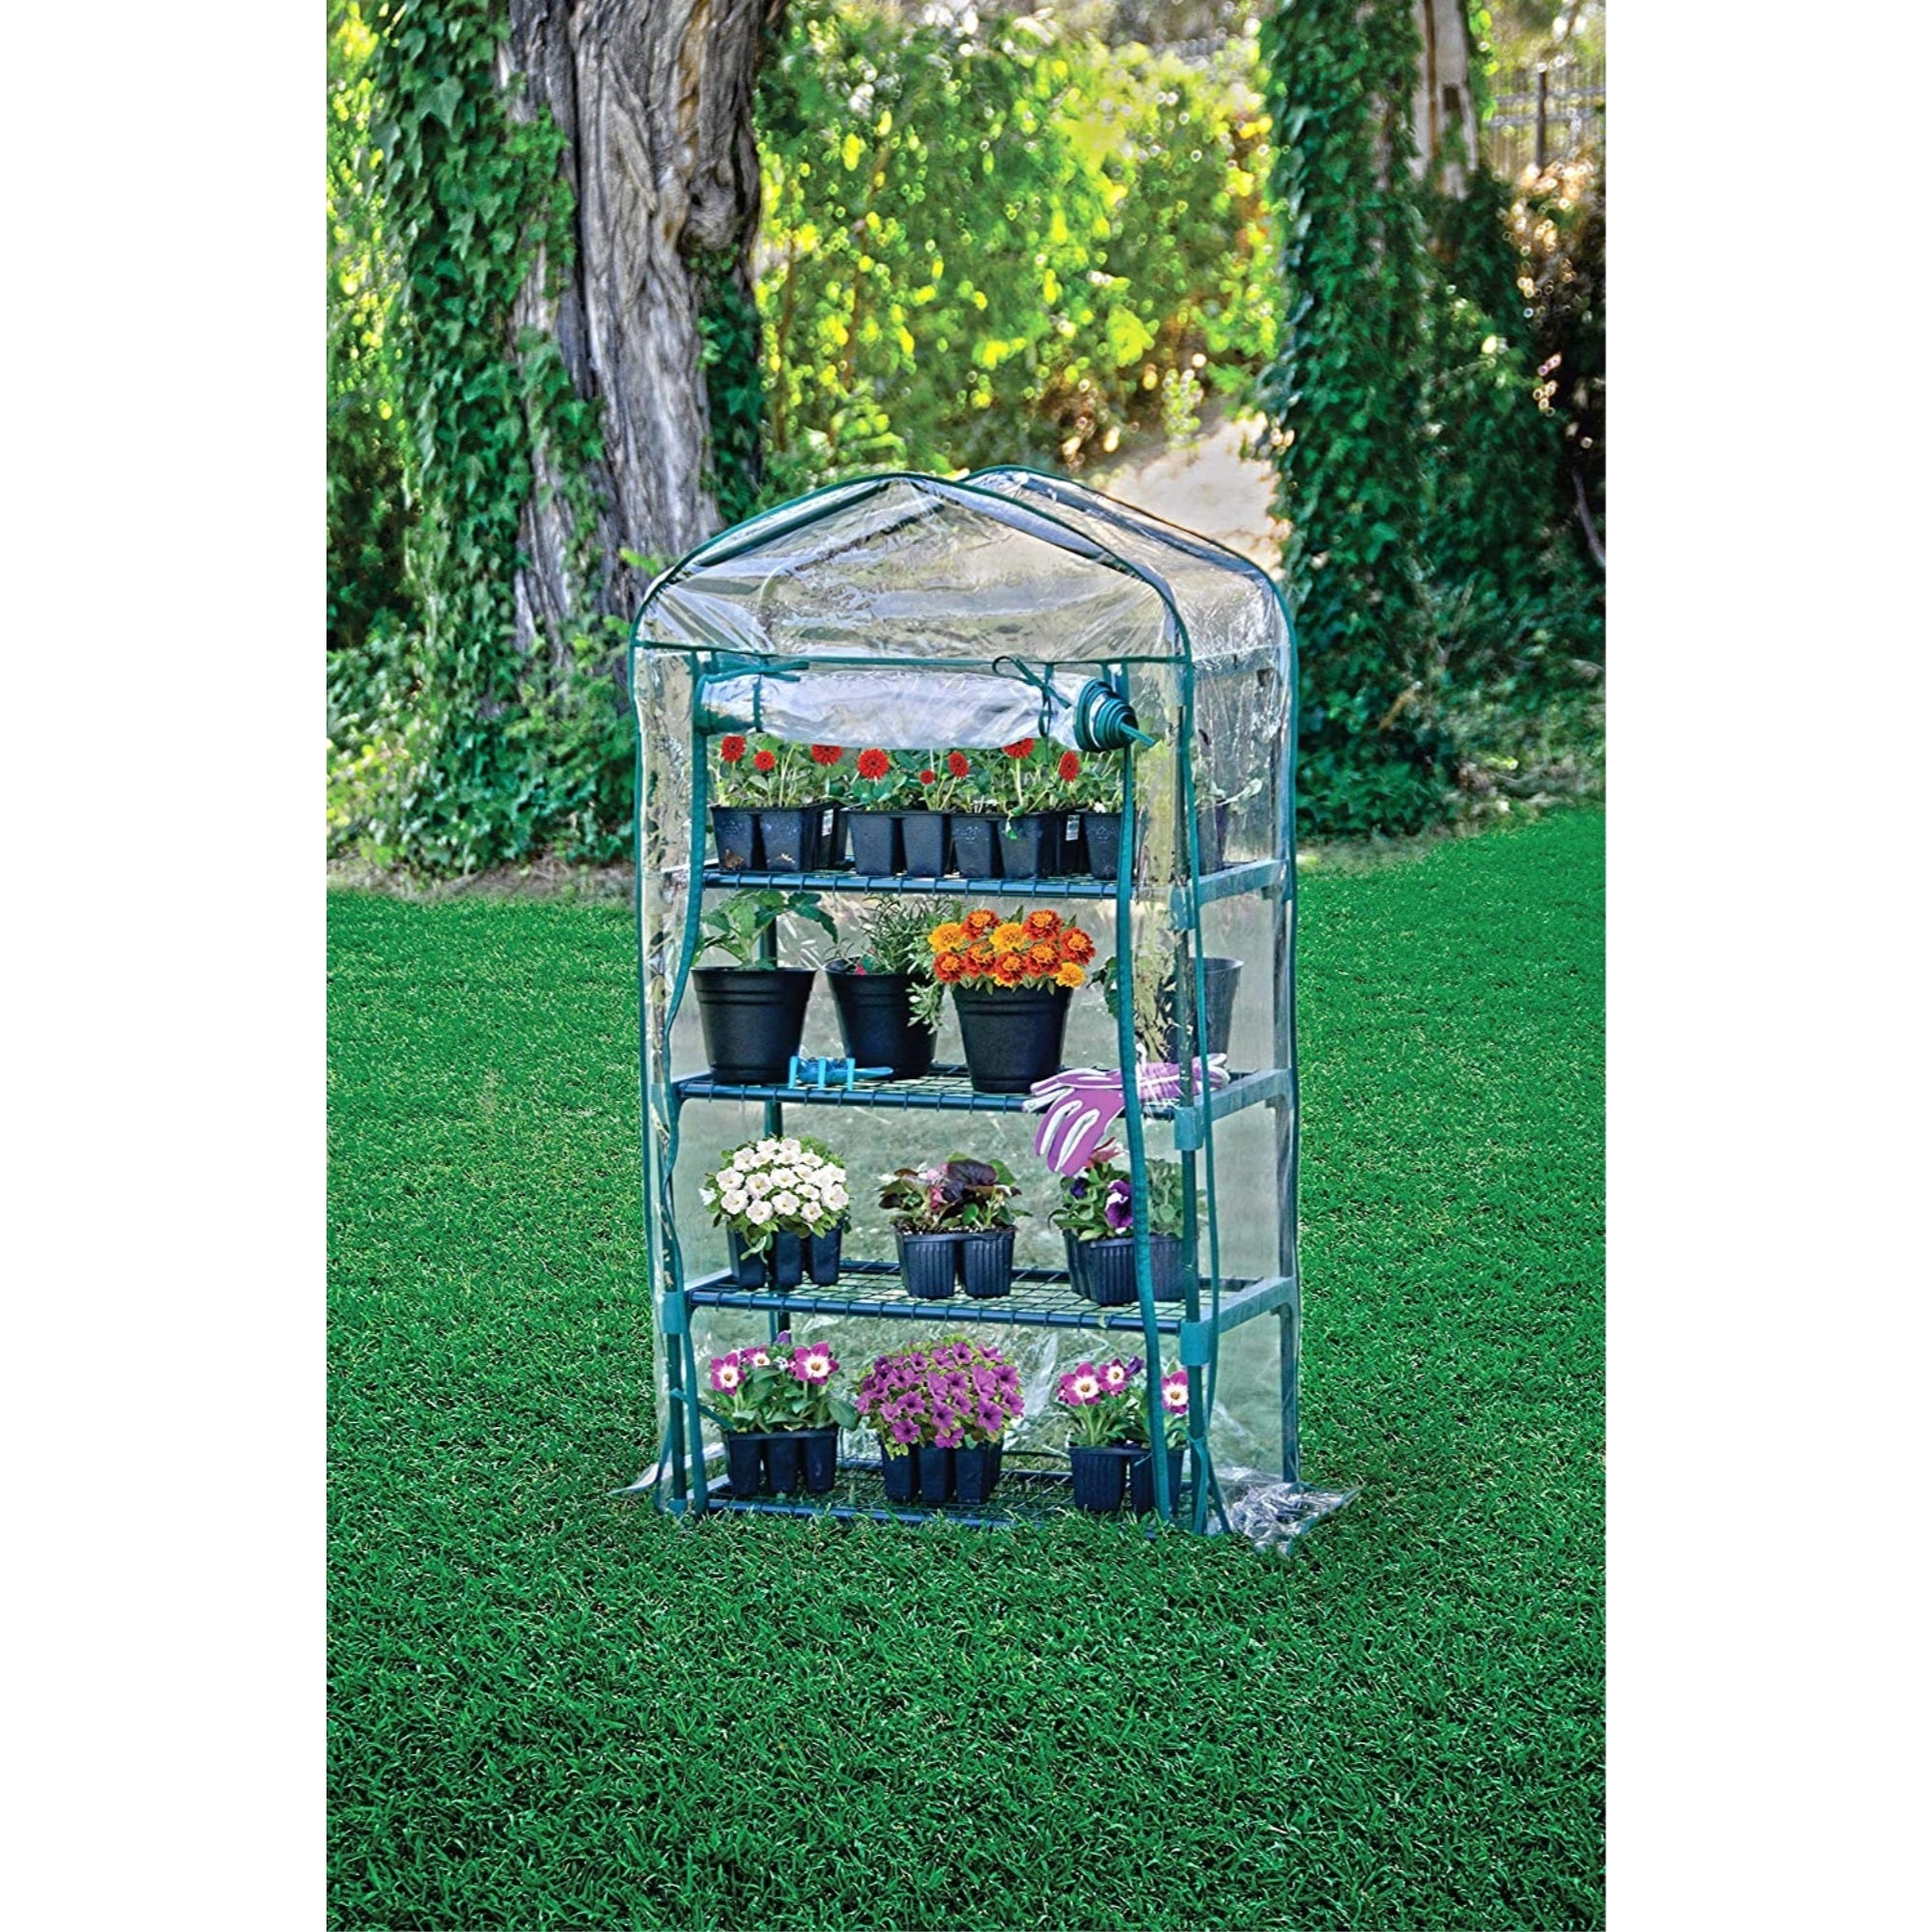 Bloom Personal Plastic Indoor/Outdoor 4-Tier Standing Greenhouse For Seed Starting and Propagation, Frost Protection, Clear, Small, 27" x 12" x 49"